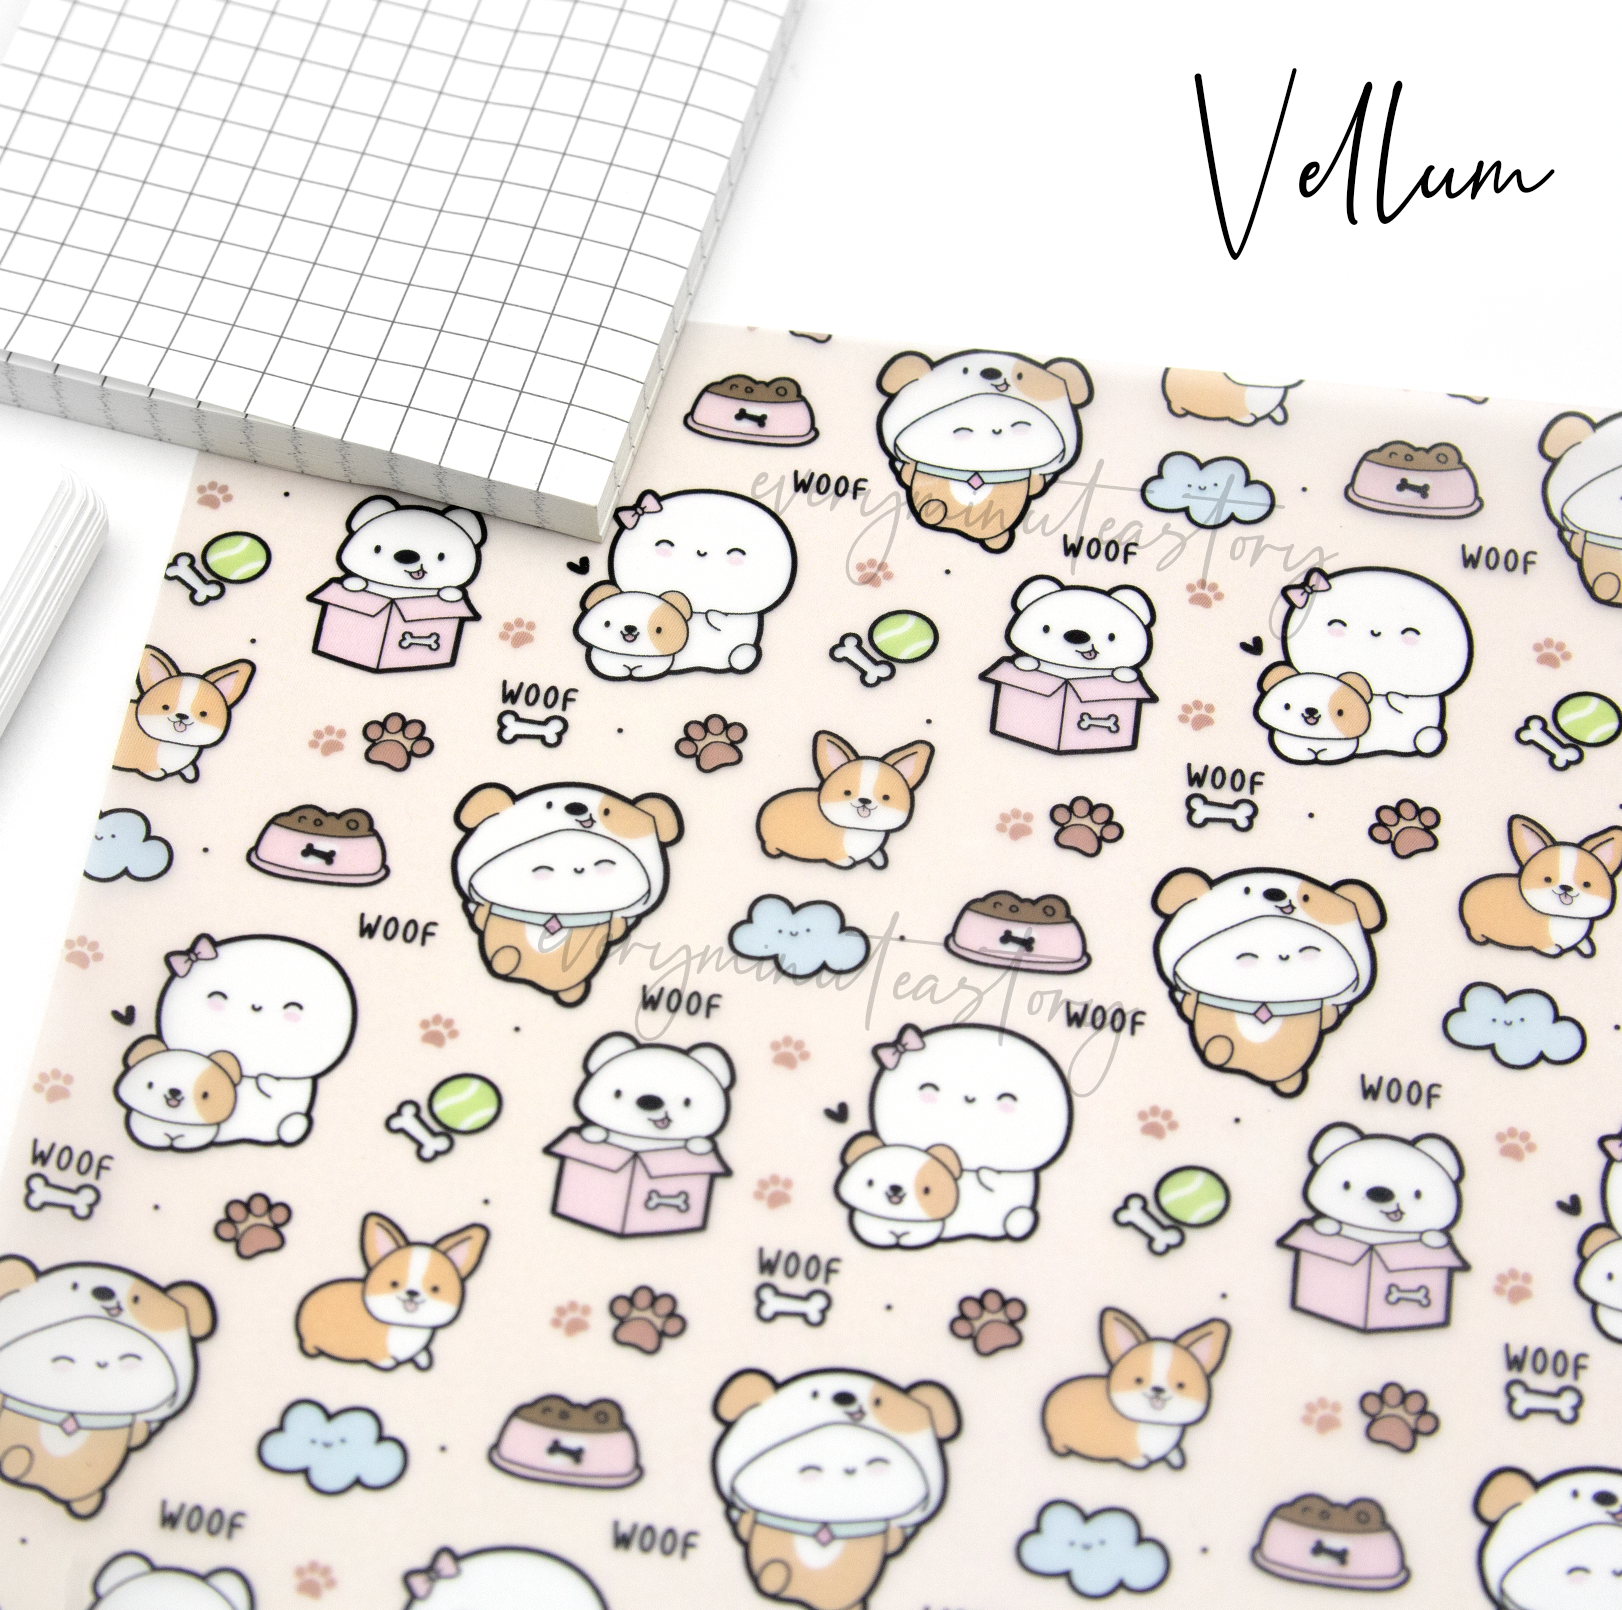 Puppy lover vellum- Limited Stock! Limit 2/order